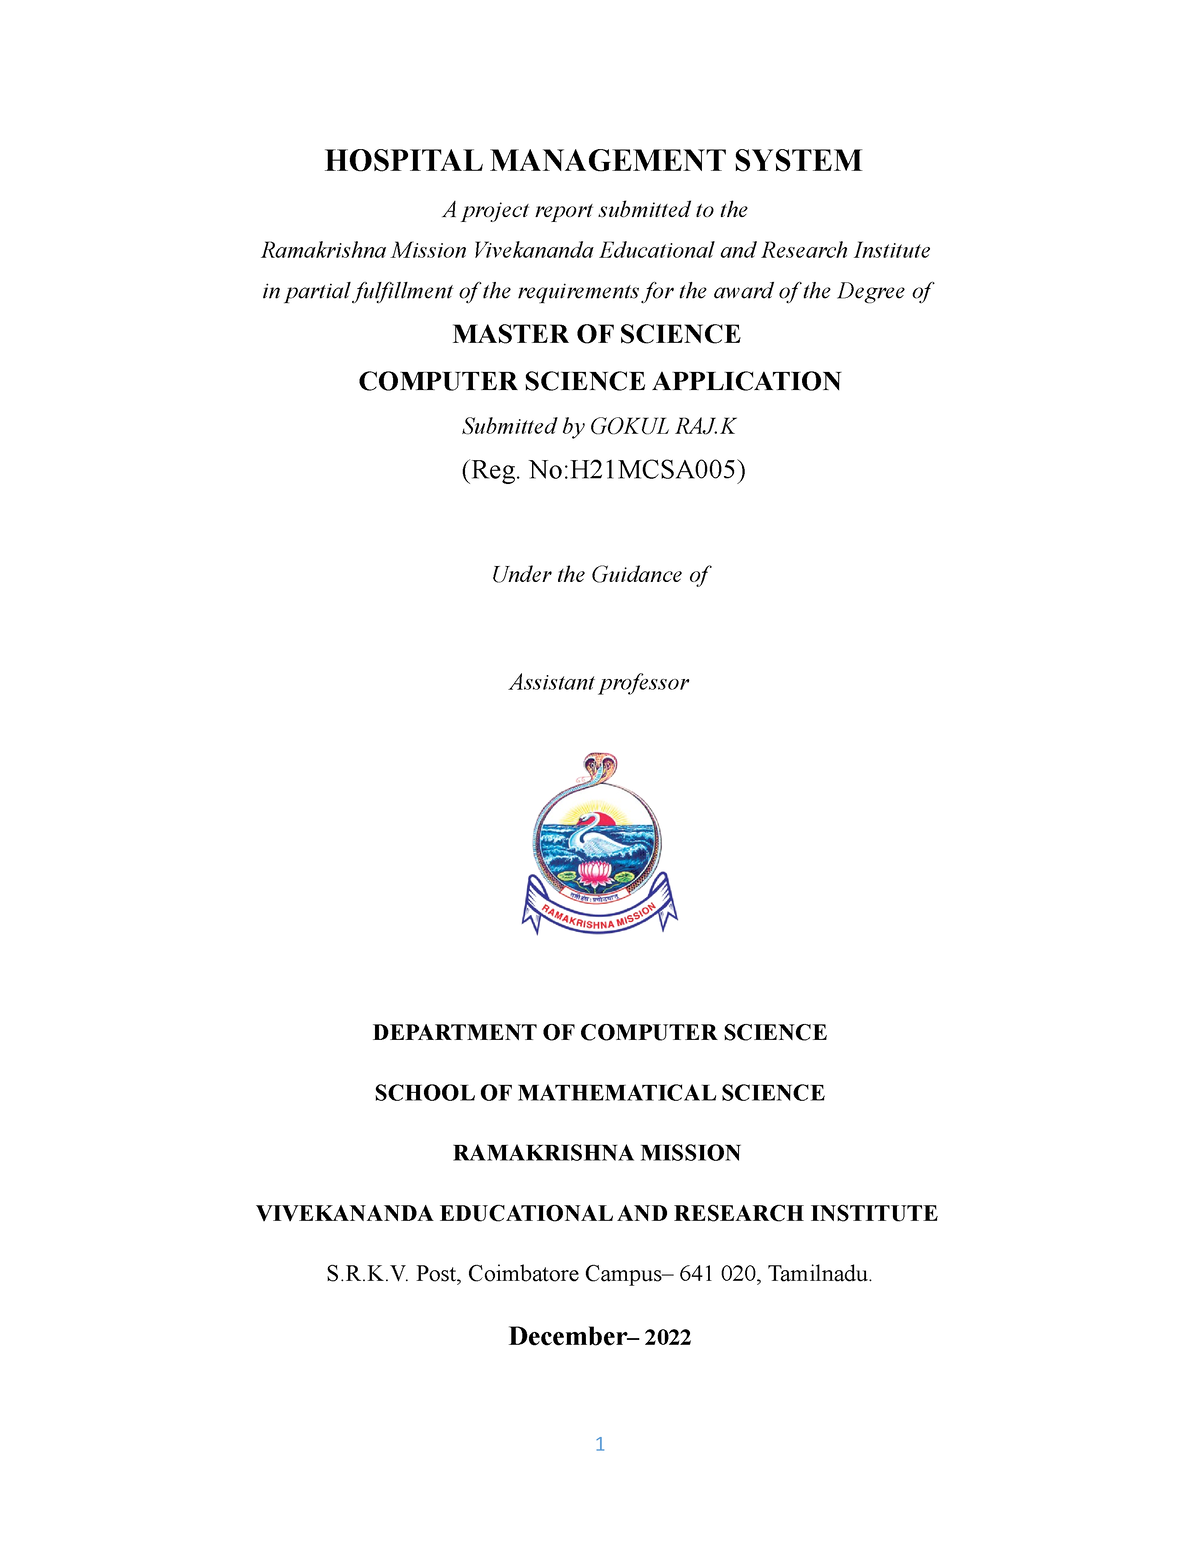 thesis on hospital management system